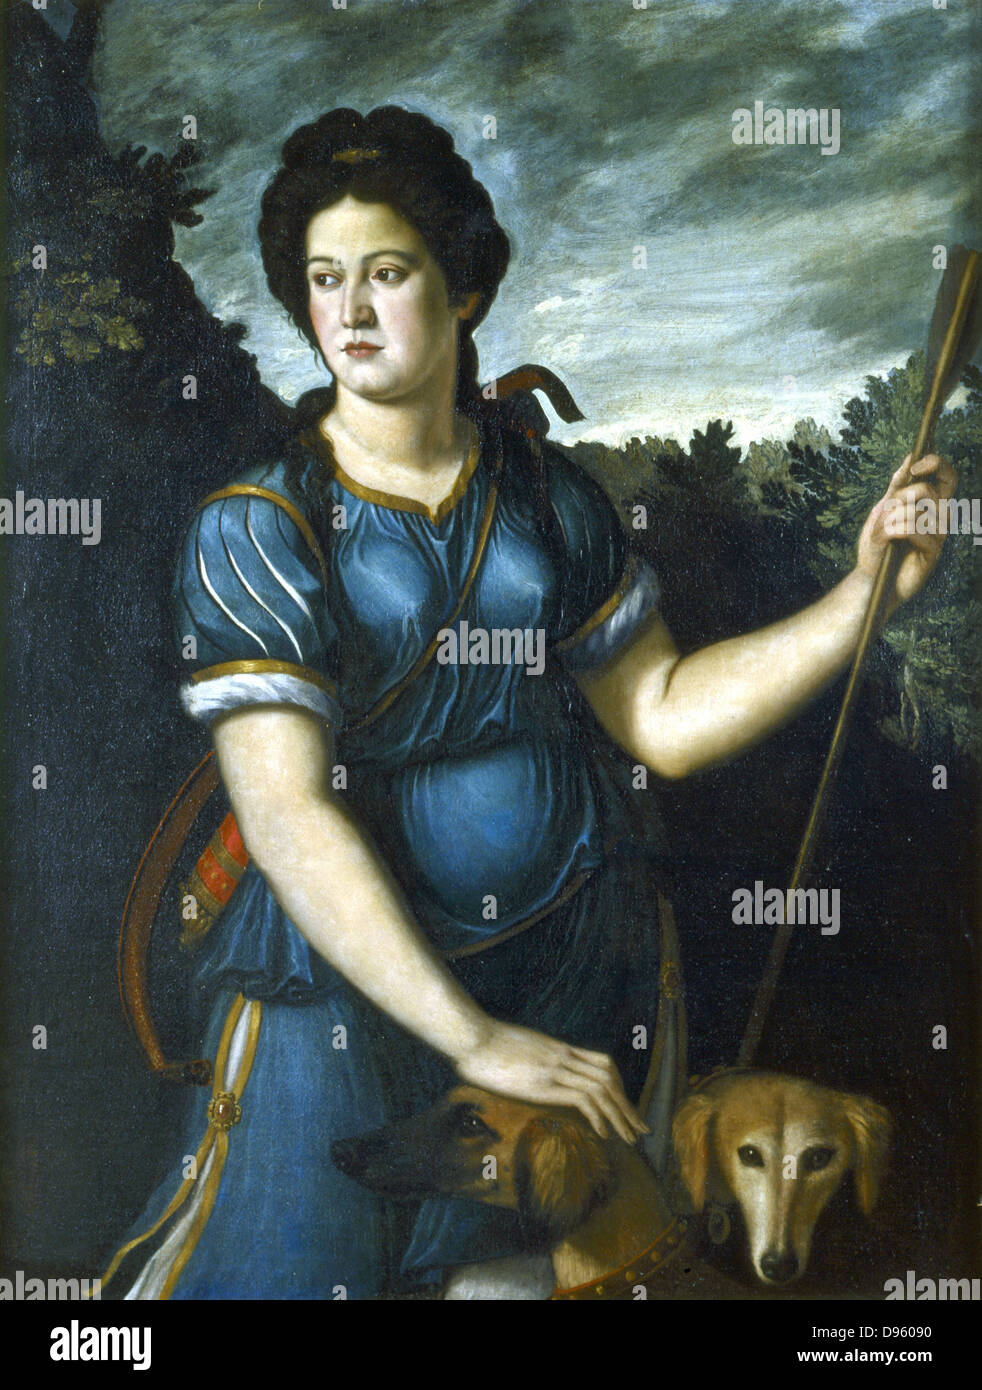 'Diana the Huntress with her Two Dogs'. Roman goddess of the Moon and of hunting (Artemis in the Greek Pantheon). School of Paris Bordone. 16th century Italian.Oil on canvas. Private Collection. Stock Photo